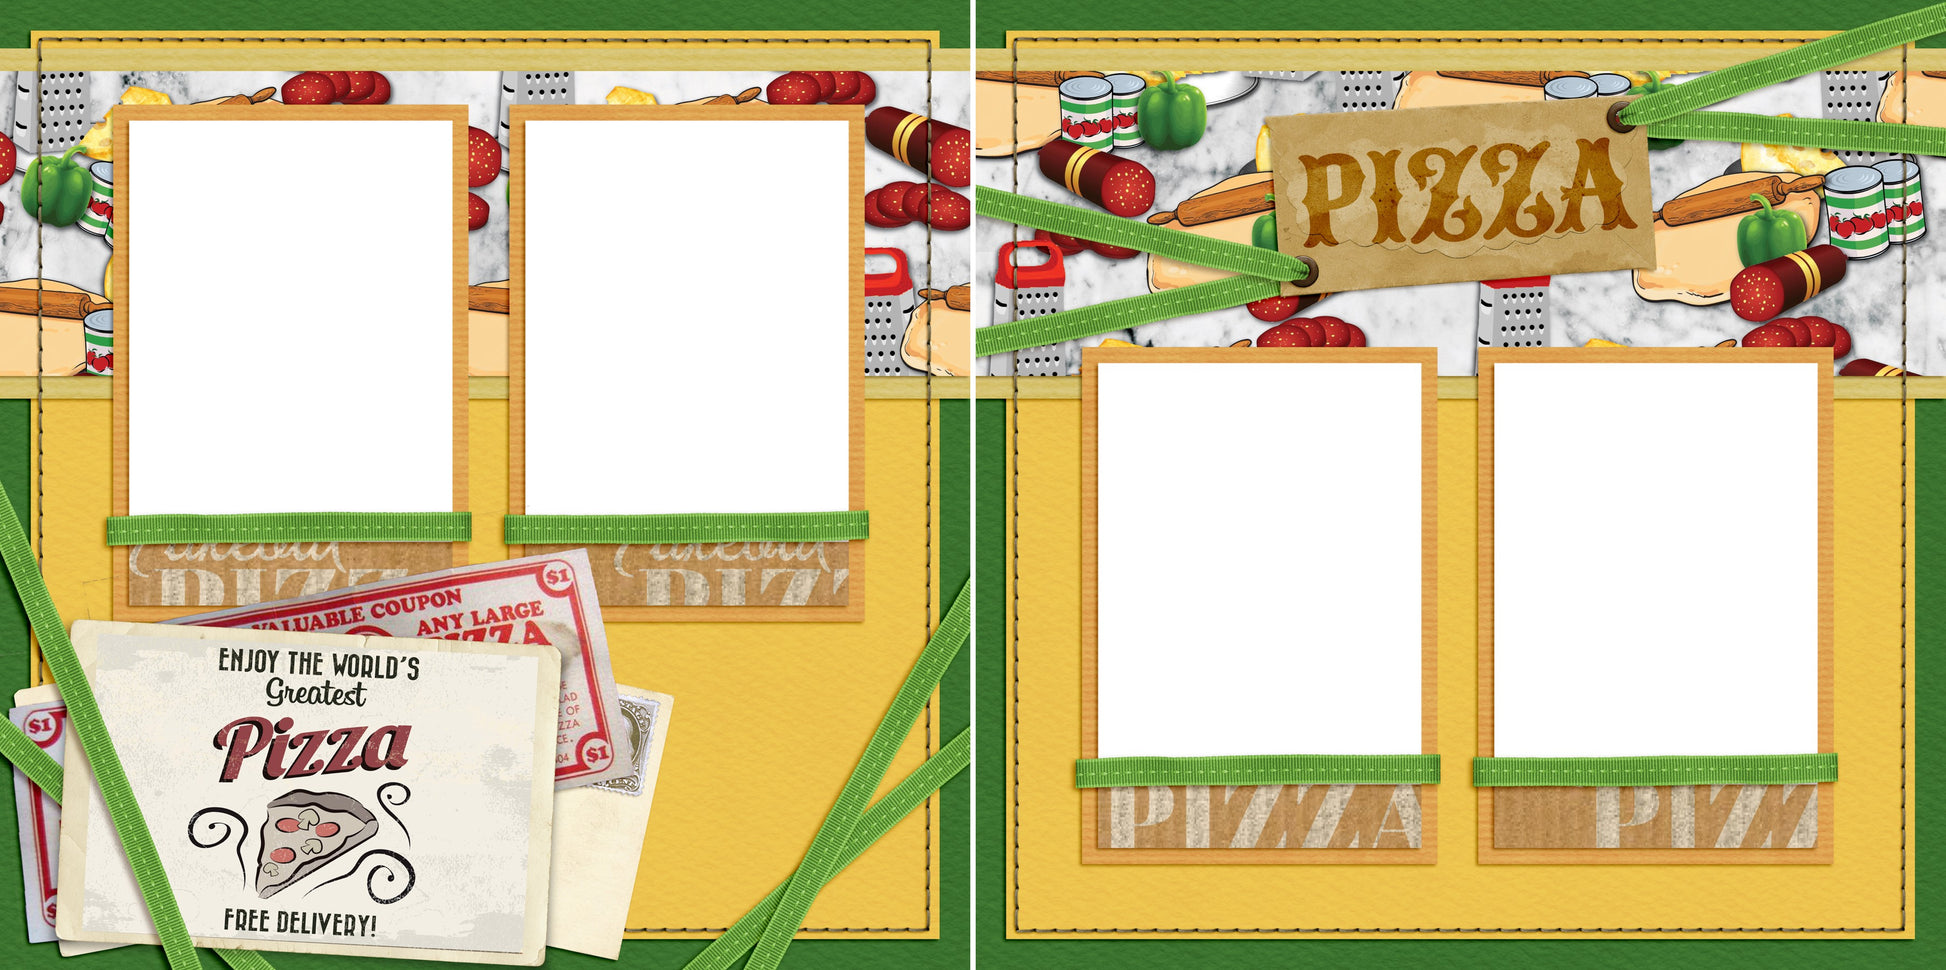 World's Greatest Pizza - Digital Scrapbook Pages - INSTANT DOWNLOAD - EZscrapbooks Scrapbook Layouts pizza, takeout